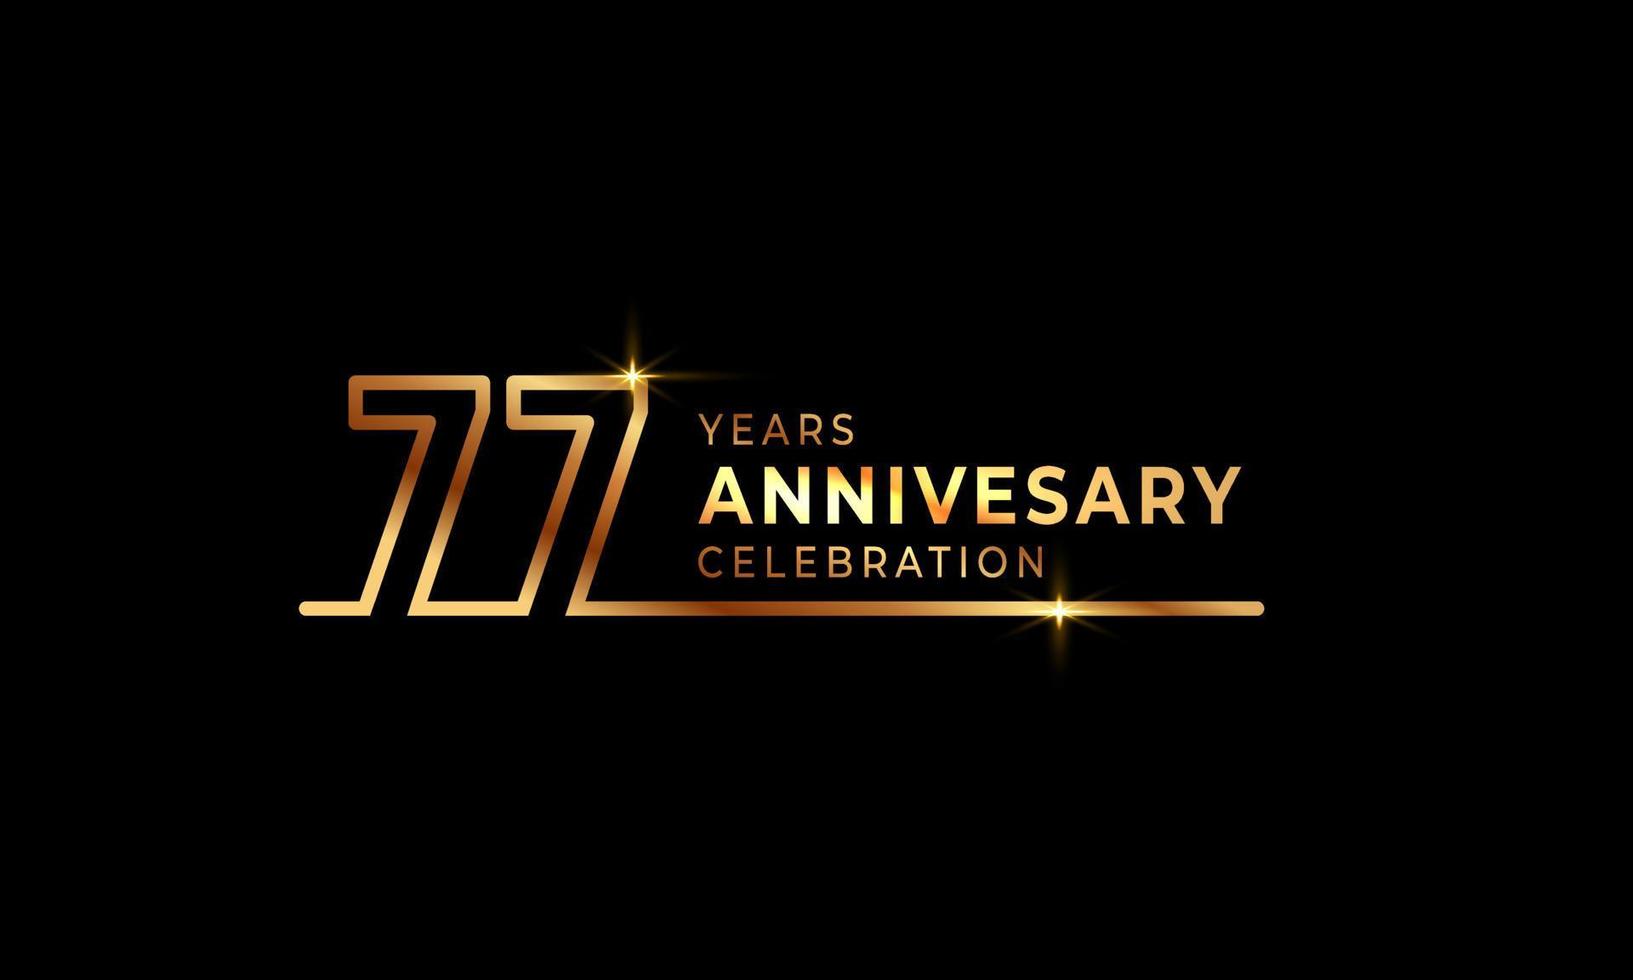 77 Year Anniversary Celebration Logotype with Golden Colored Font Numbers Made of One Connected Line for Celebration Event, Wedding, Greeting card, and Invitation Isolated on Dark Background vector